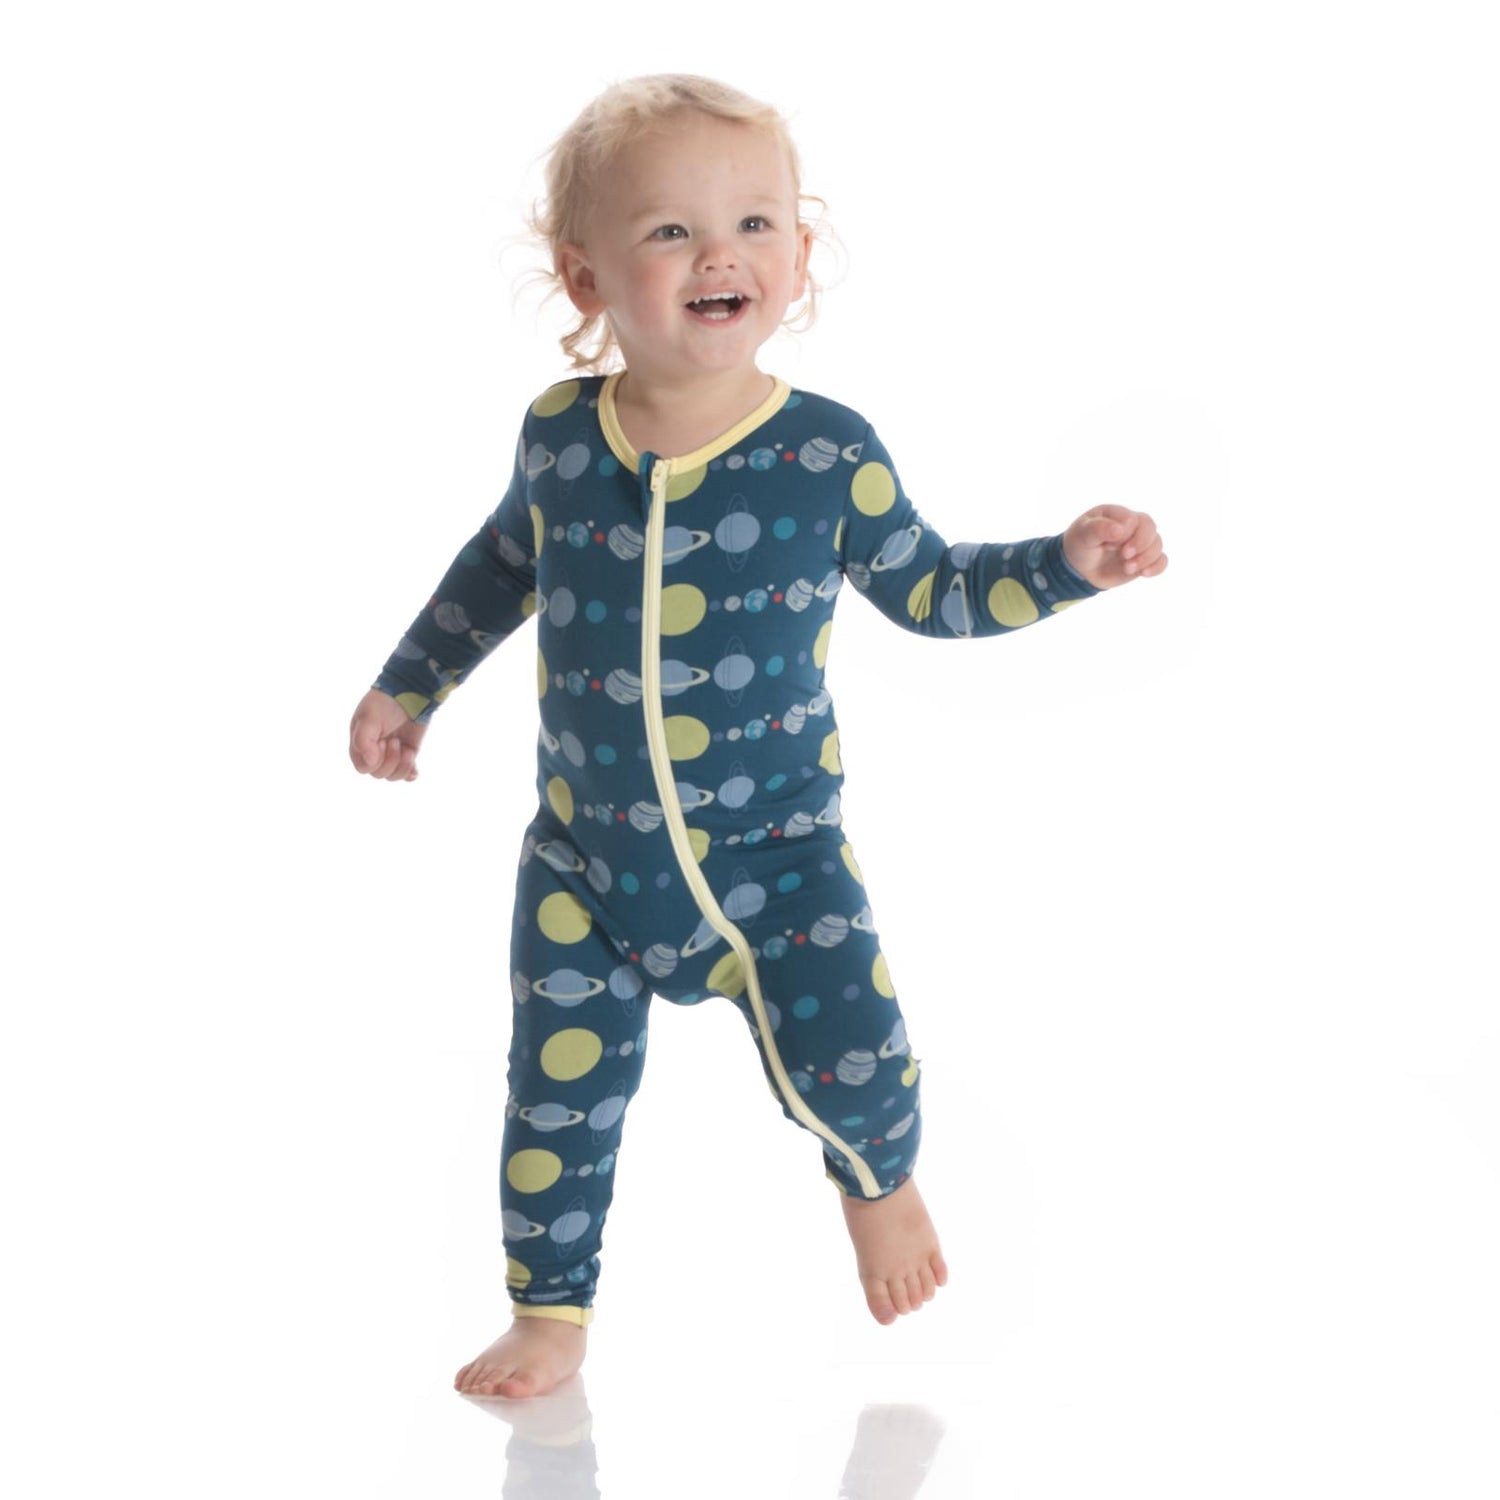 KicKee Pants Footie with Zipper - Peacock Planets, 9-12 Months